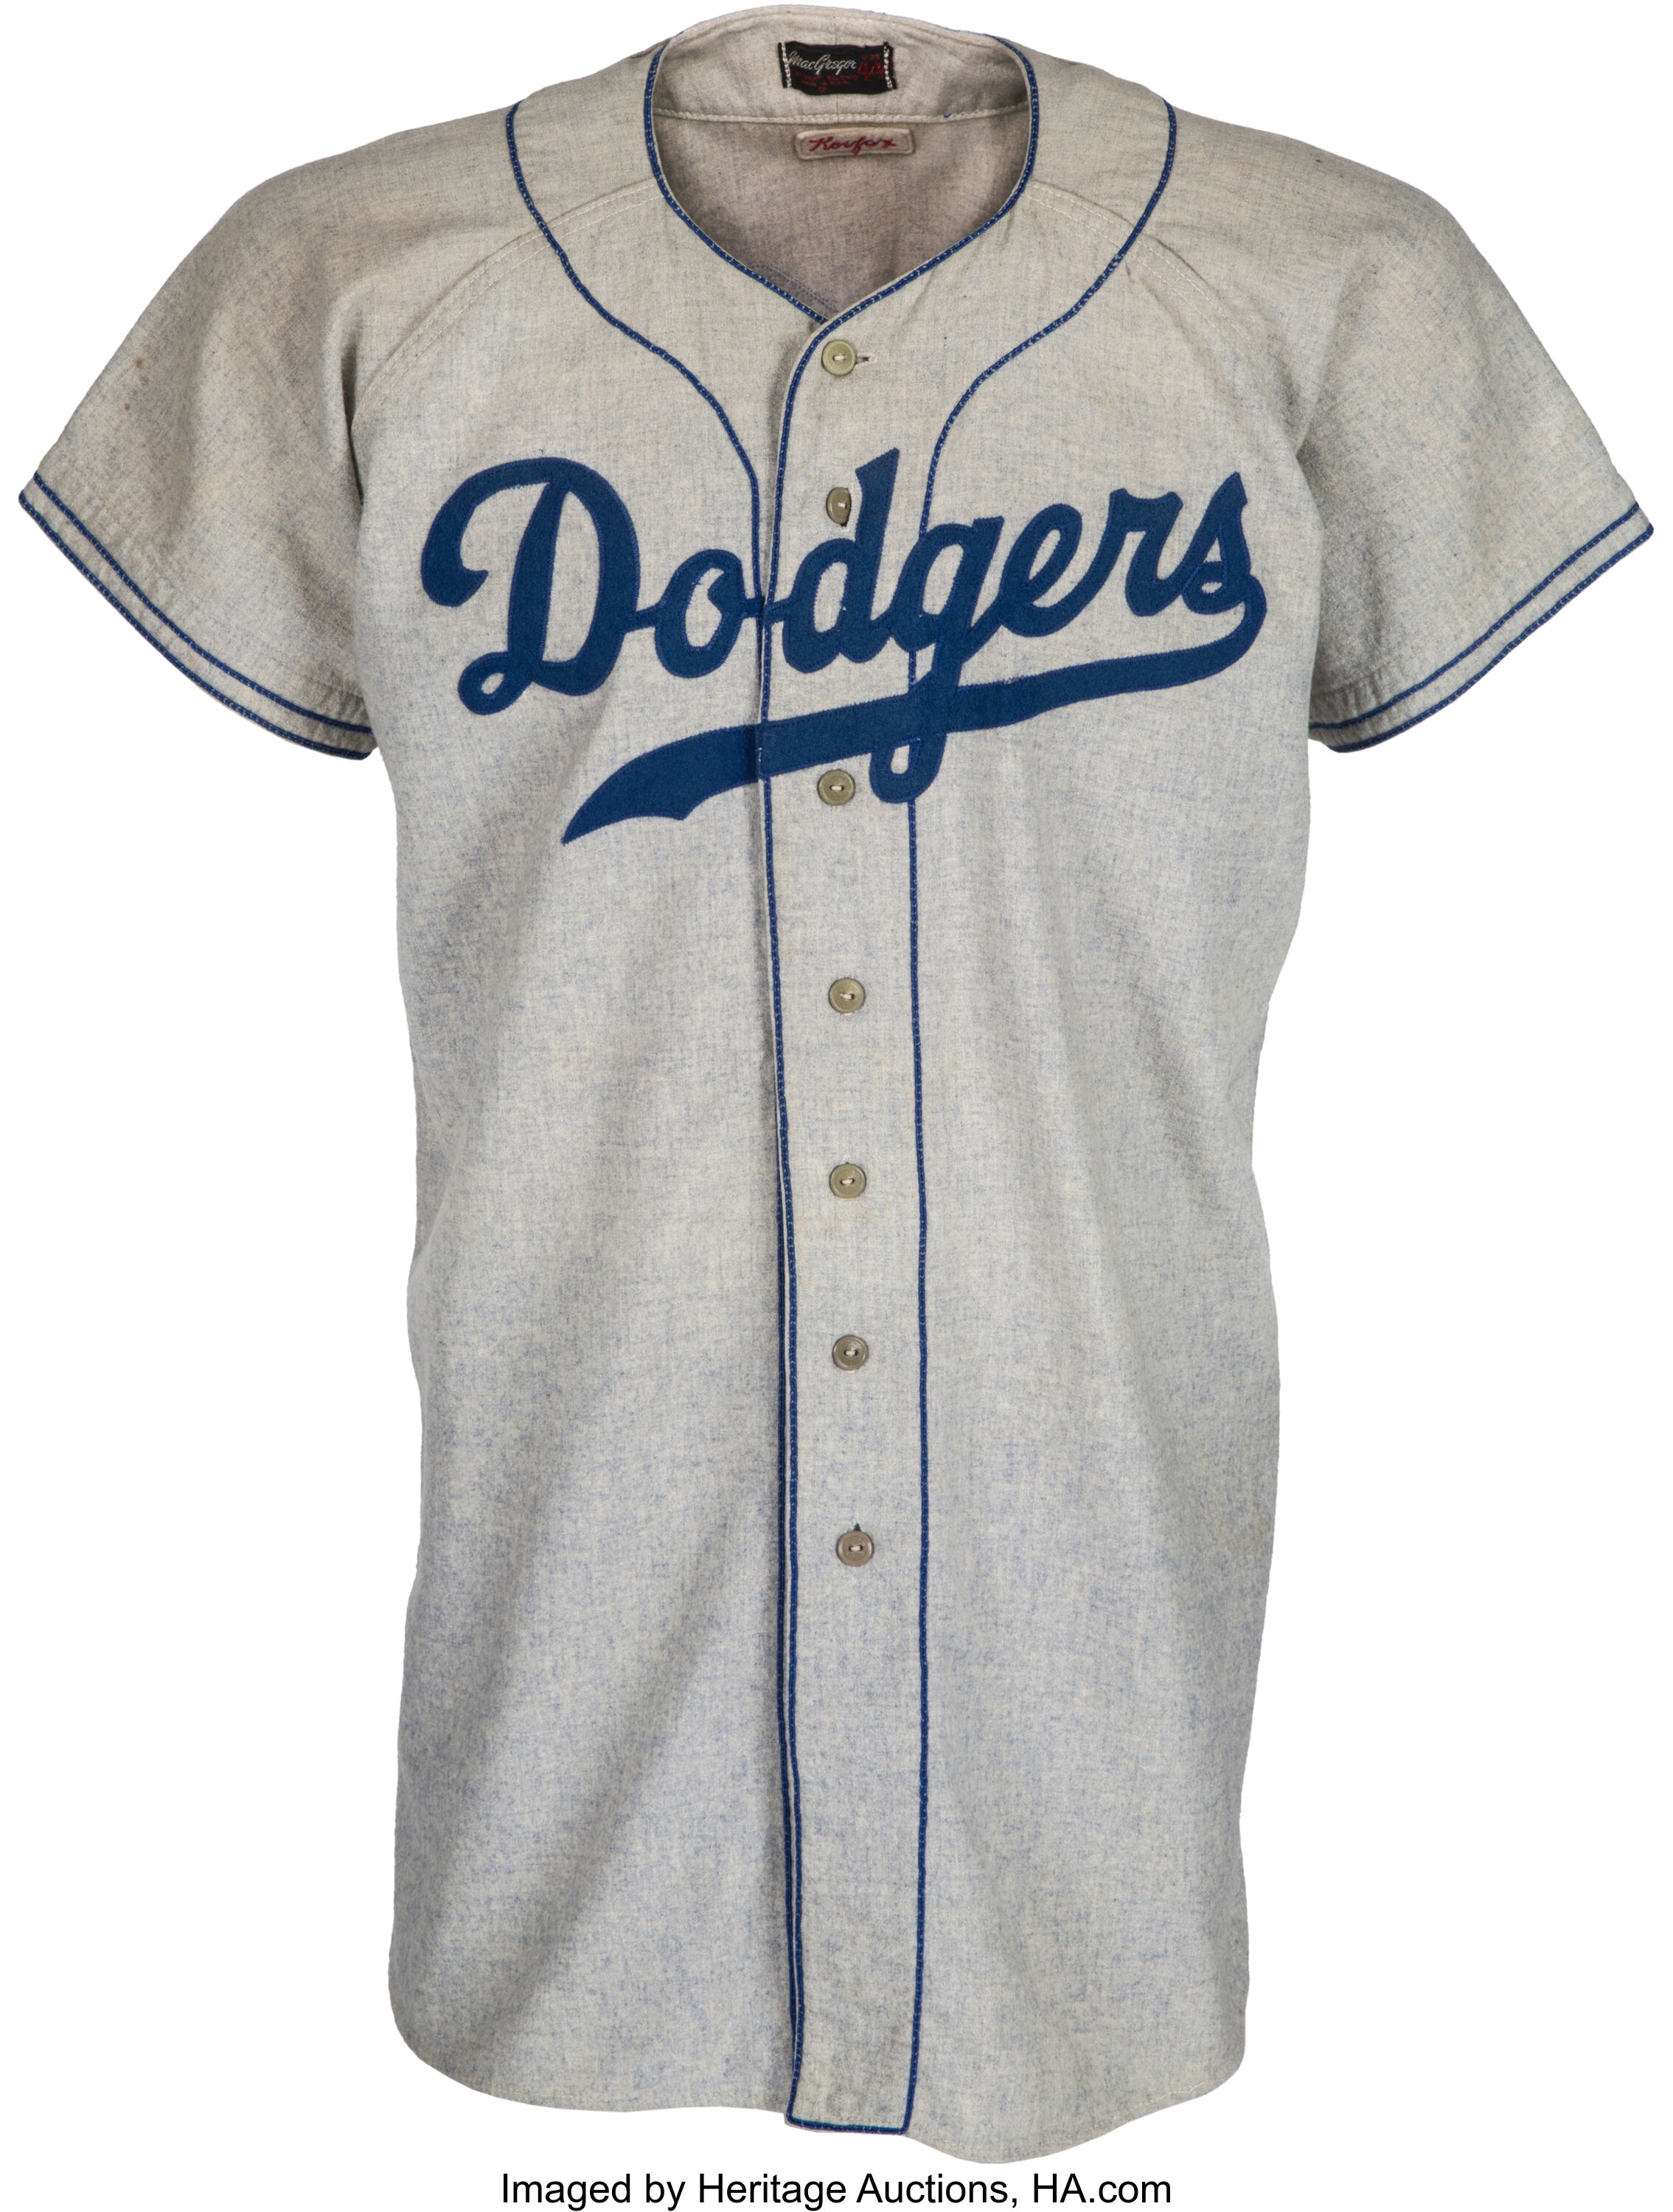 Sandy Koufax jersey could sell for $500,000